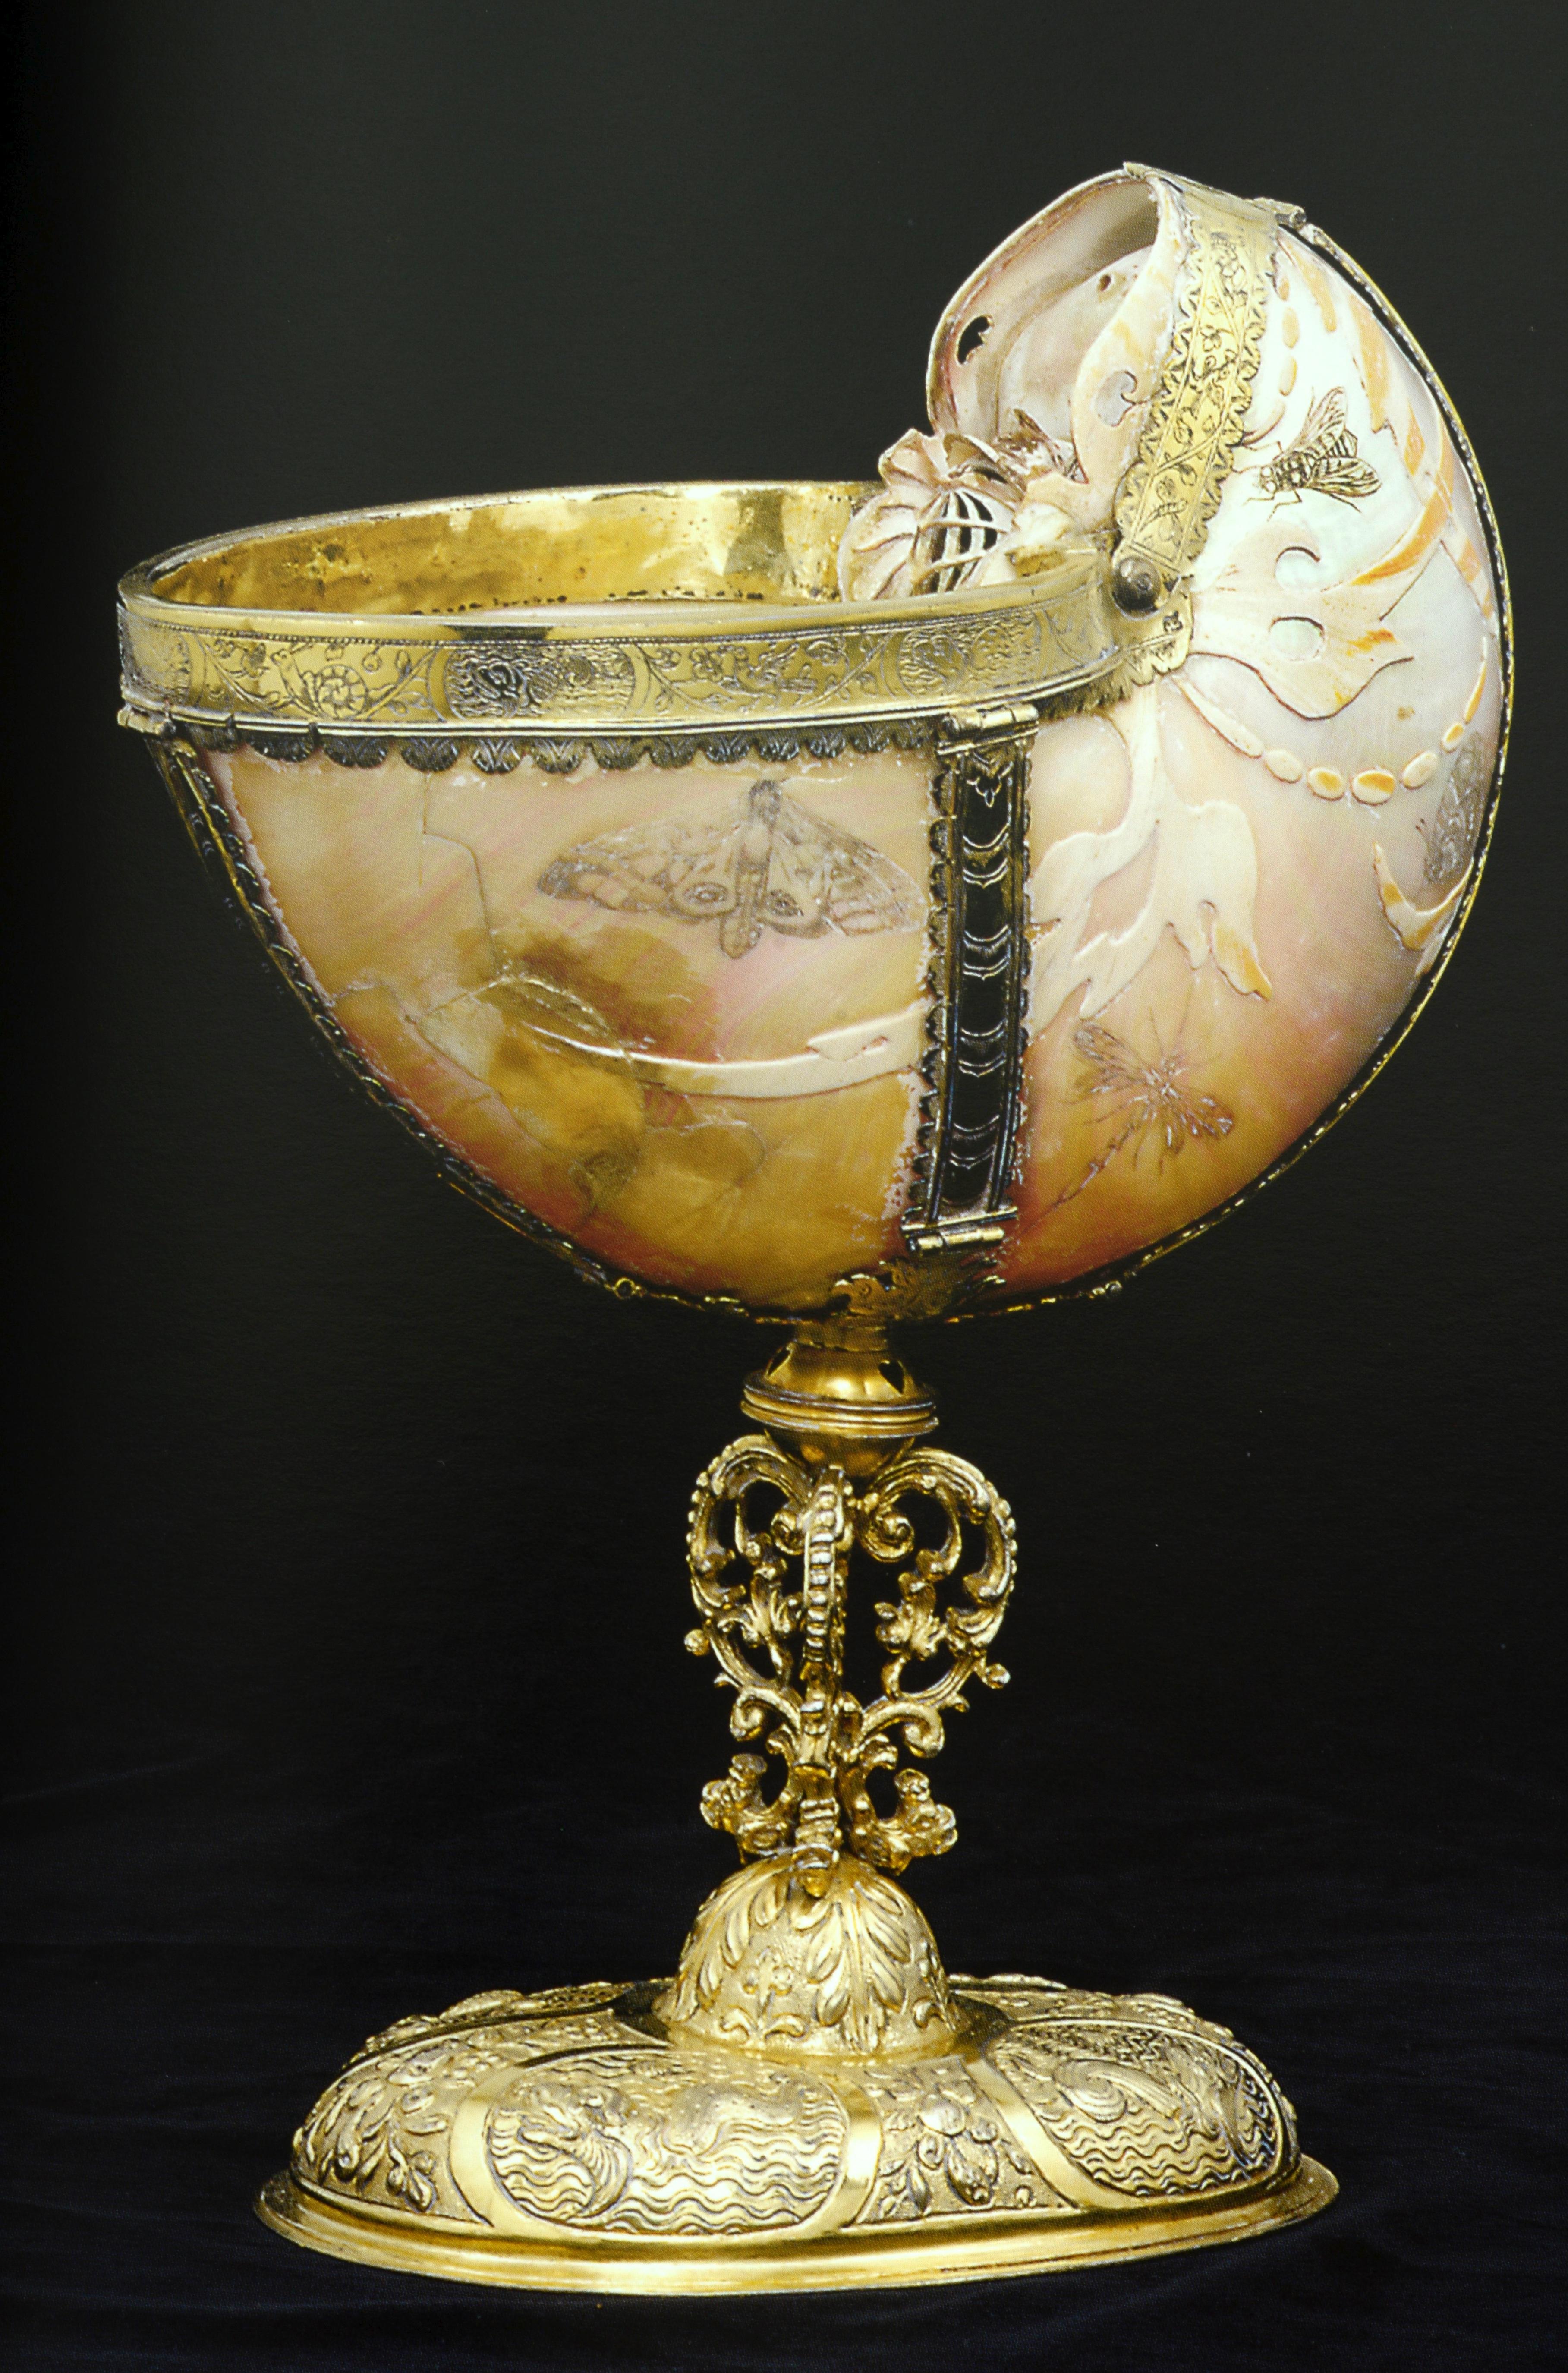 Boulle to Jansen: An important European private collection, June 2003. Including porcelain, paperweights and maritime pictures from an important European private collection. The collection was assembled under the guidance of Pierre Delbée from the